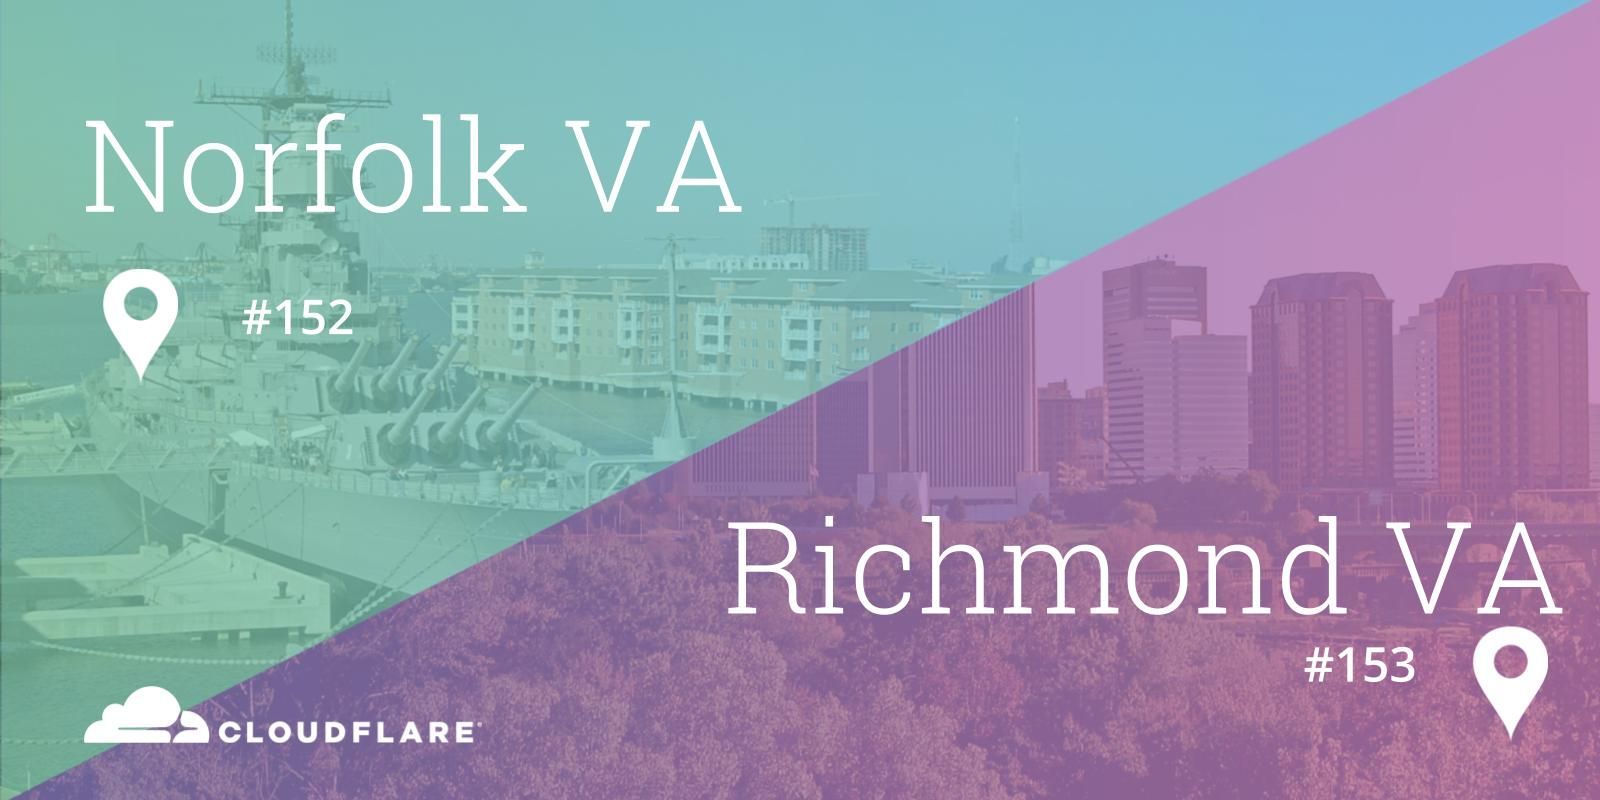 Norfolk and Richmond, Virginia: Cloudflare's 152nd and 153rd cities